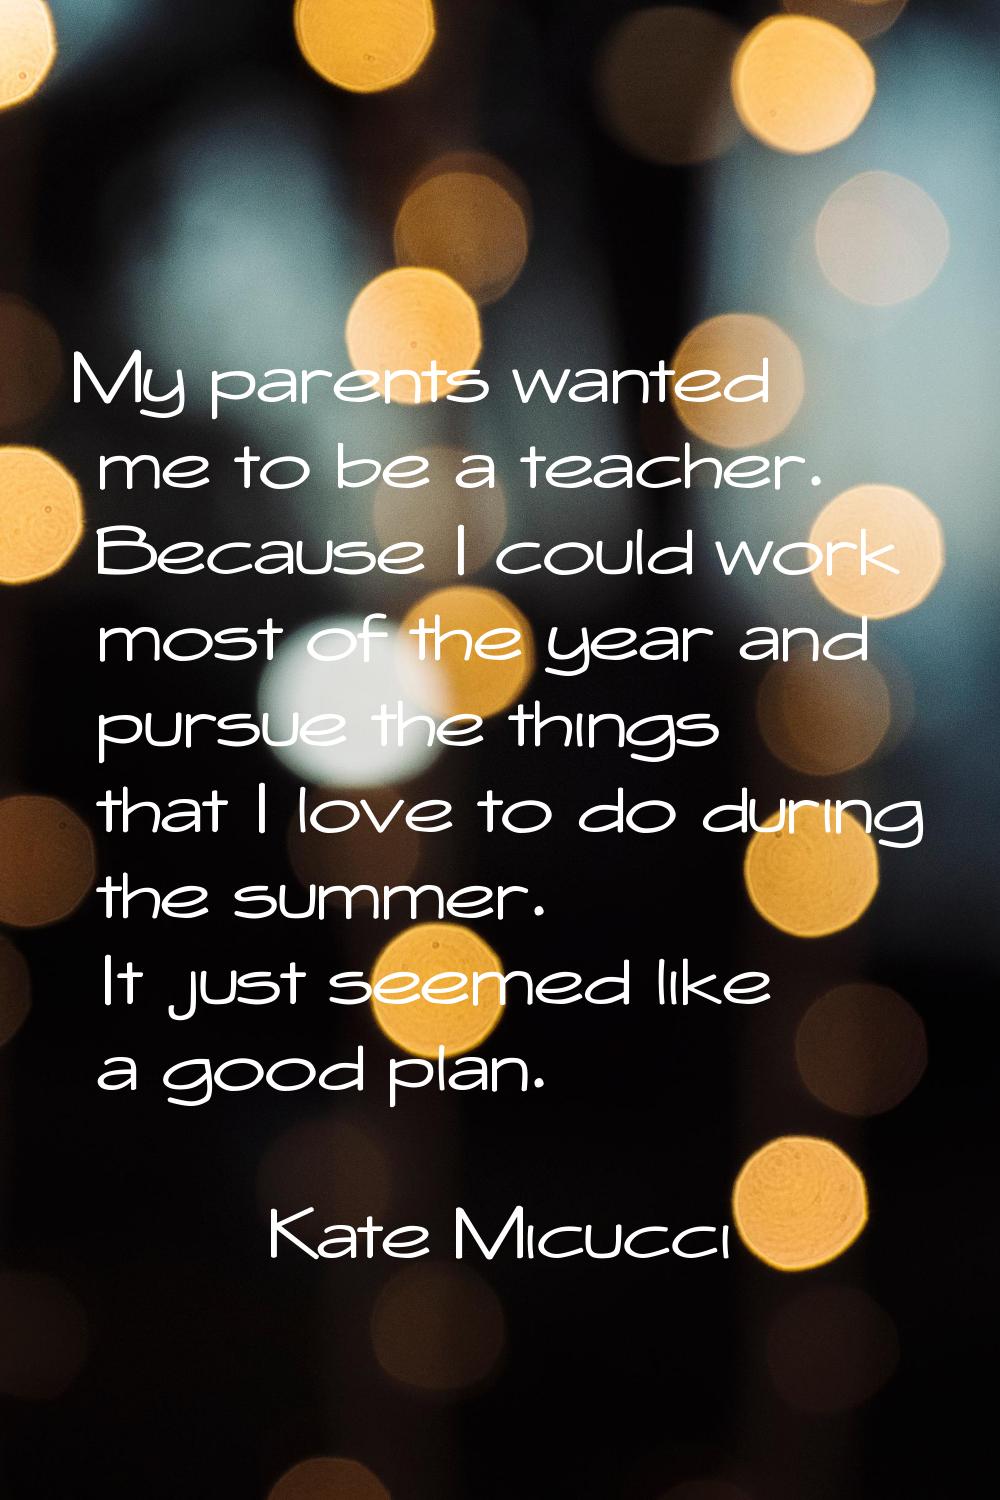 My parents wanted me to be a teacher. Because I could work most of the year and pursue the things t